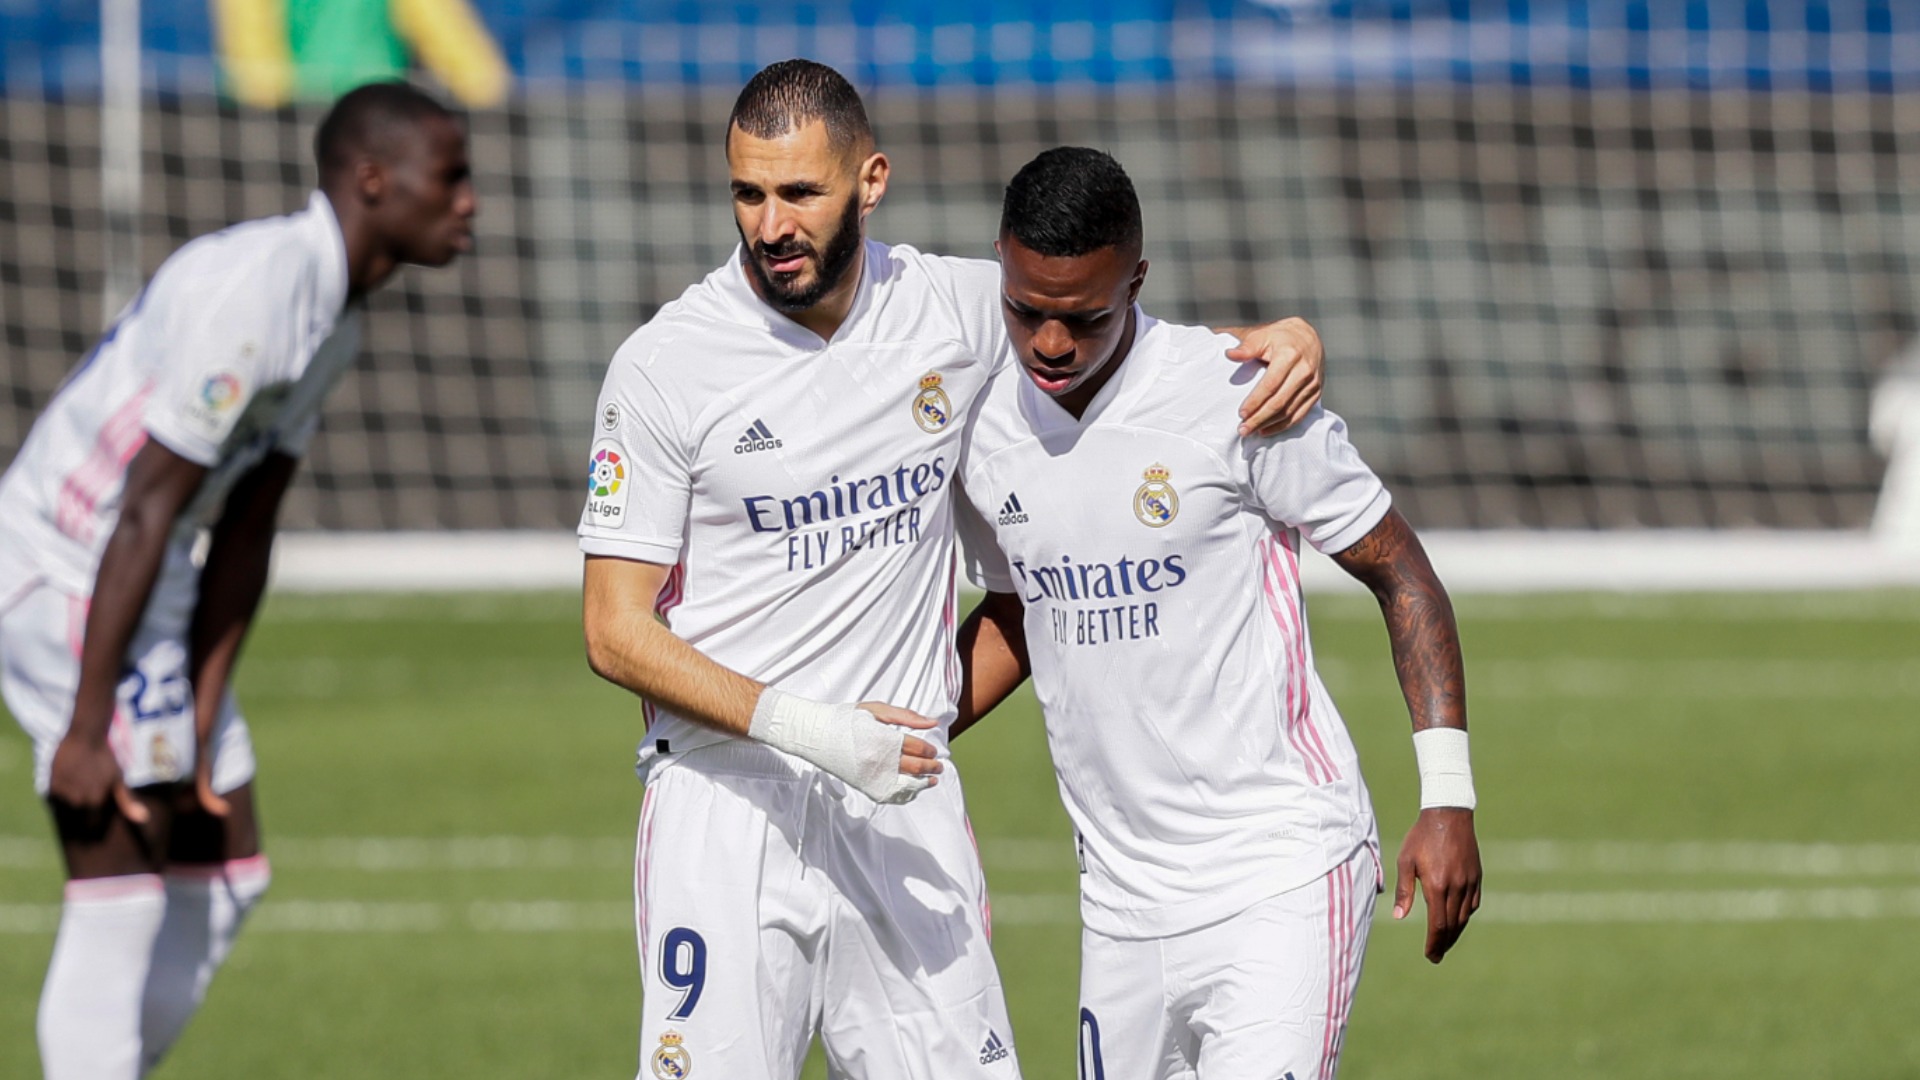 'They talked and it is perfect' - No issue between Benzema and Vinicius, insists Real Madrid manager Zidane